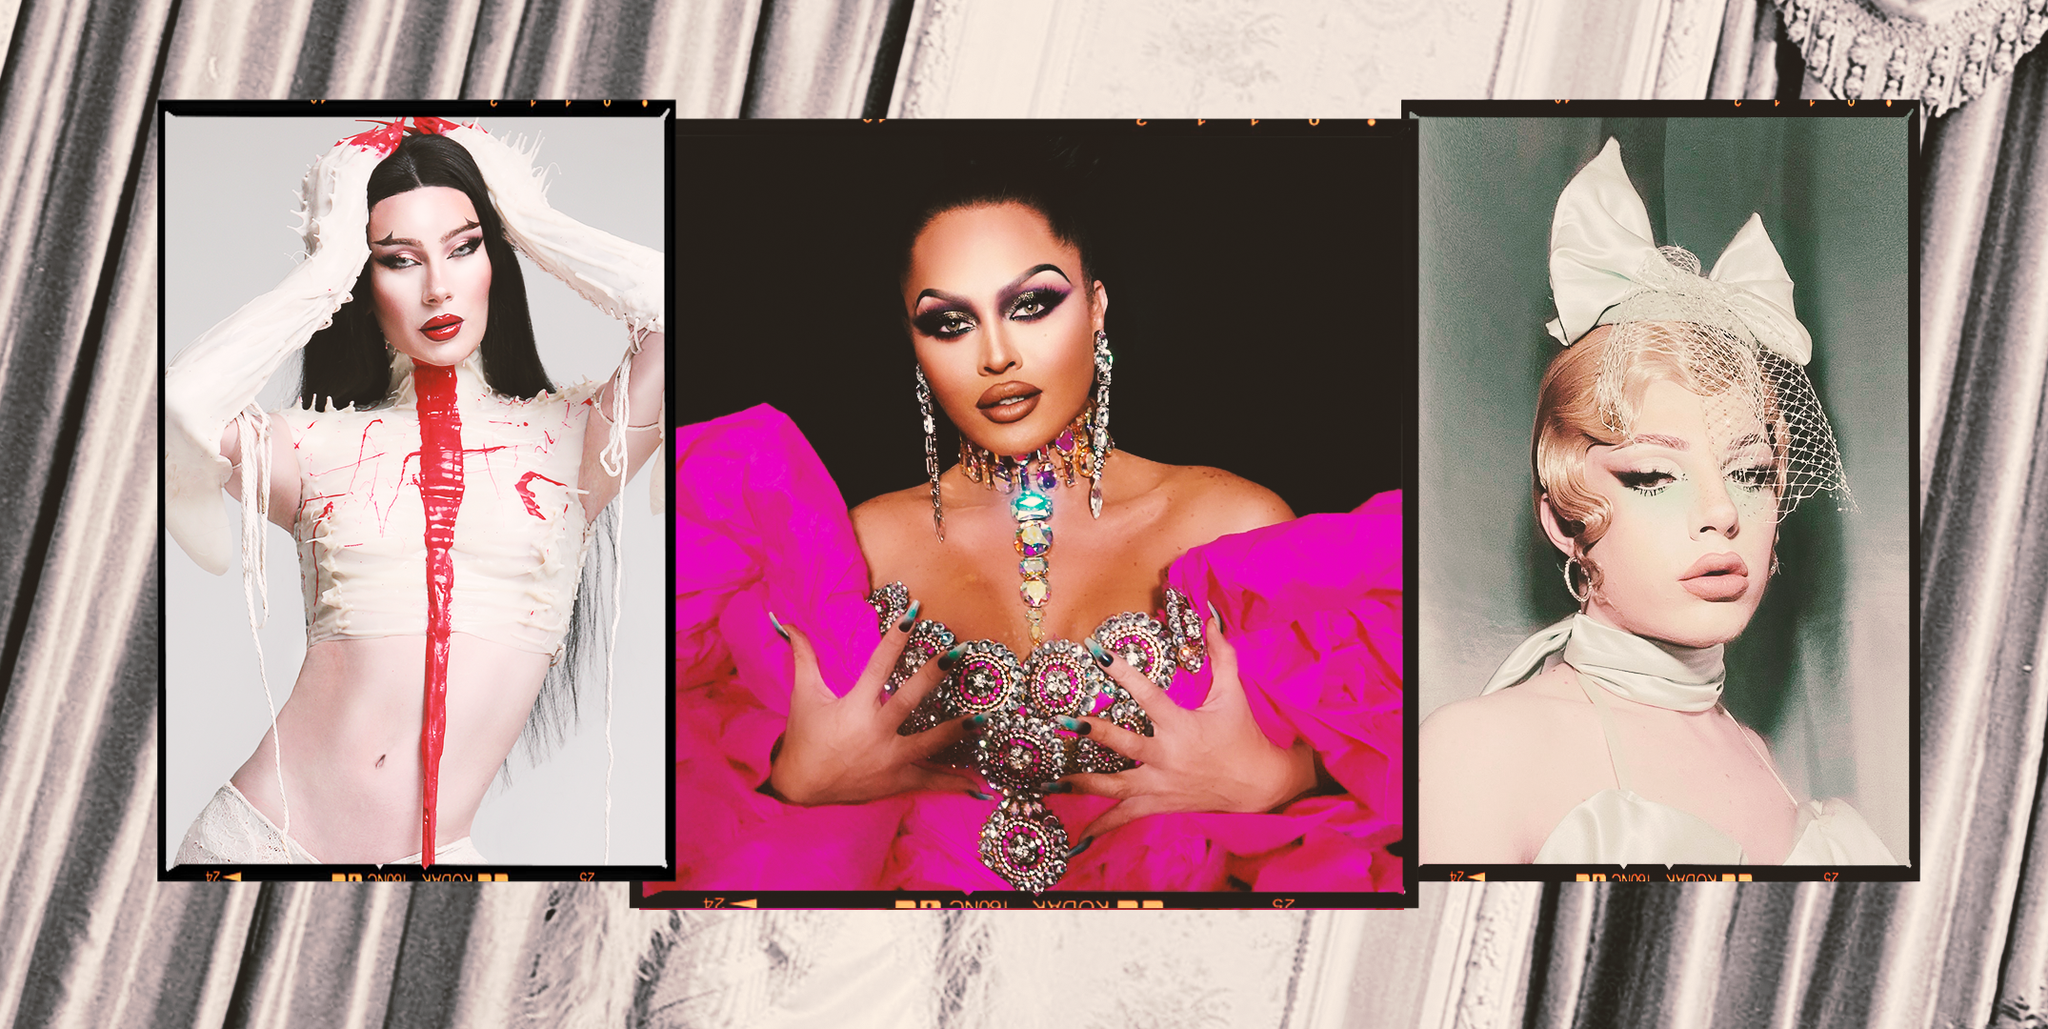 bosco, sasha colby and dakota schiffer on their relationships with beauty